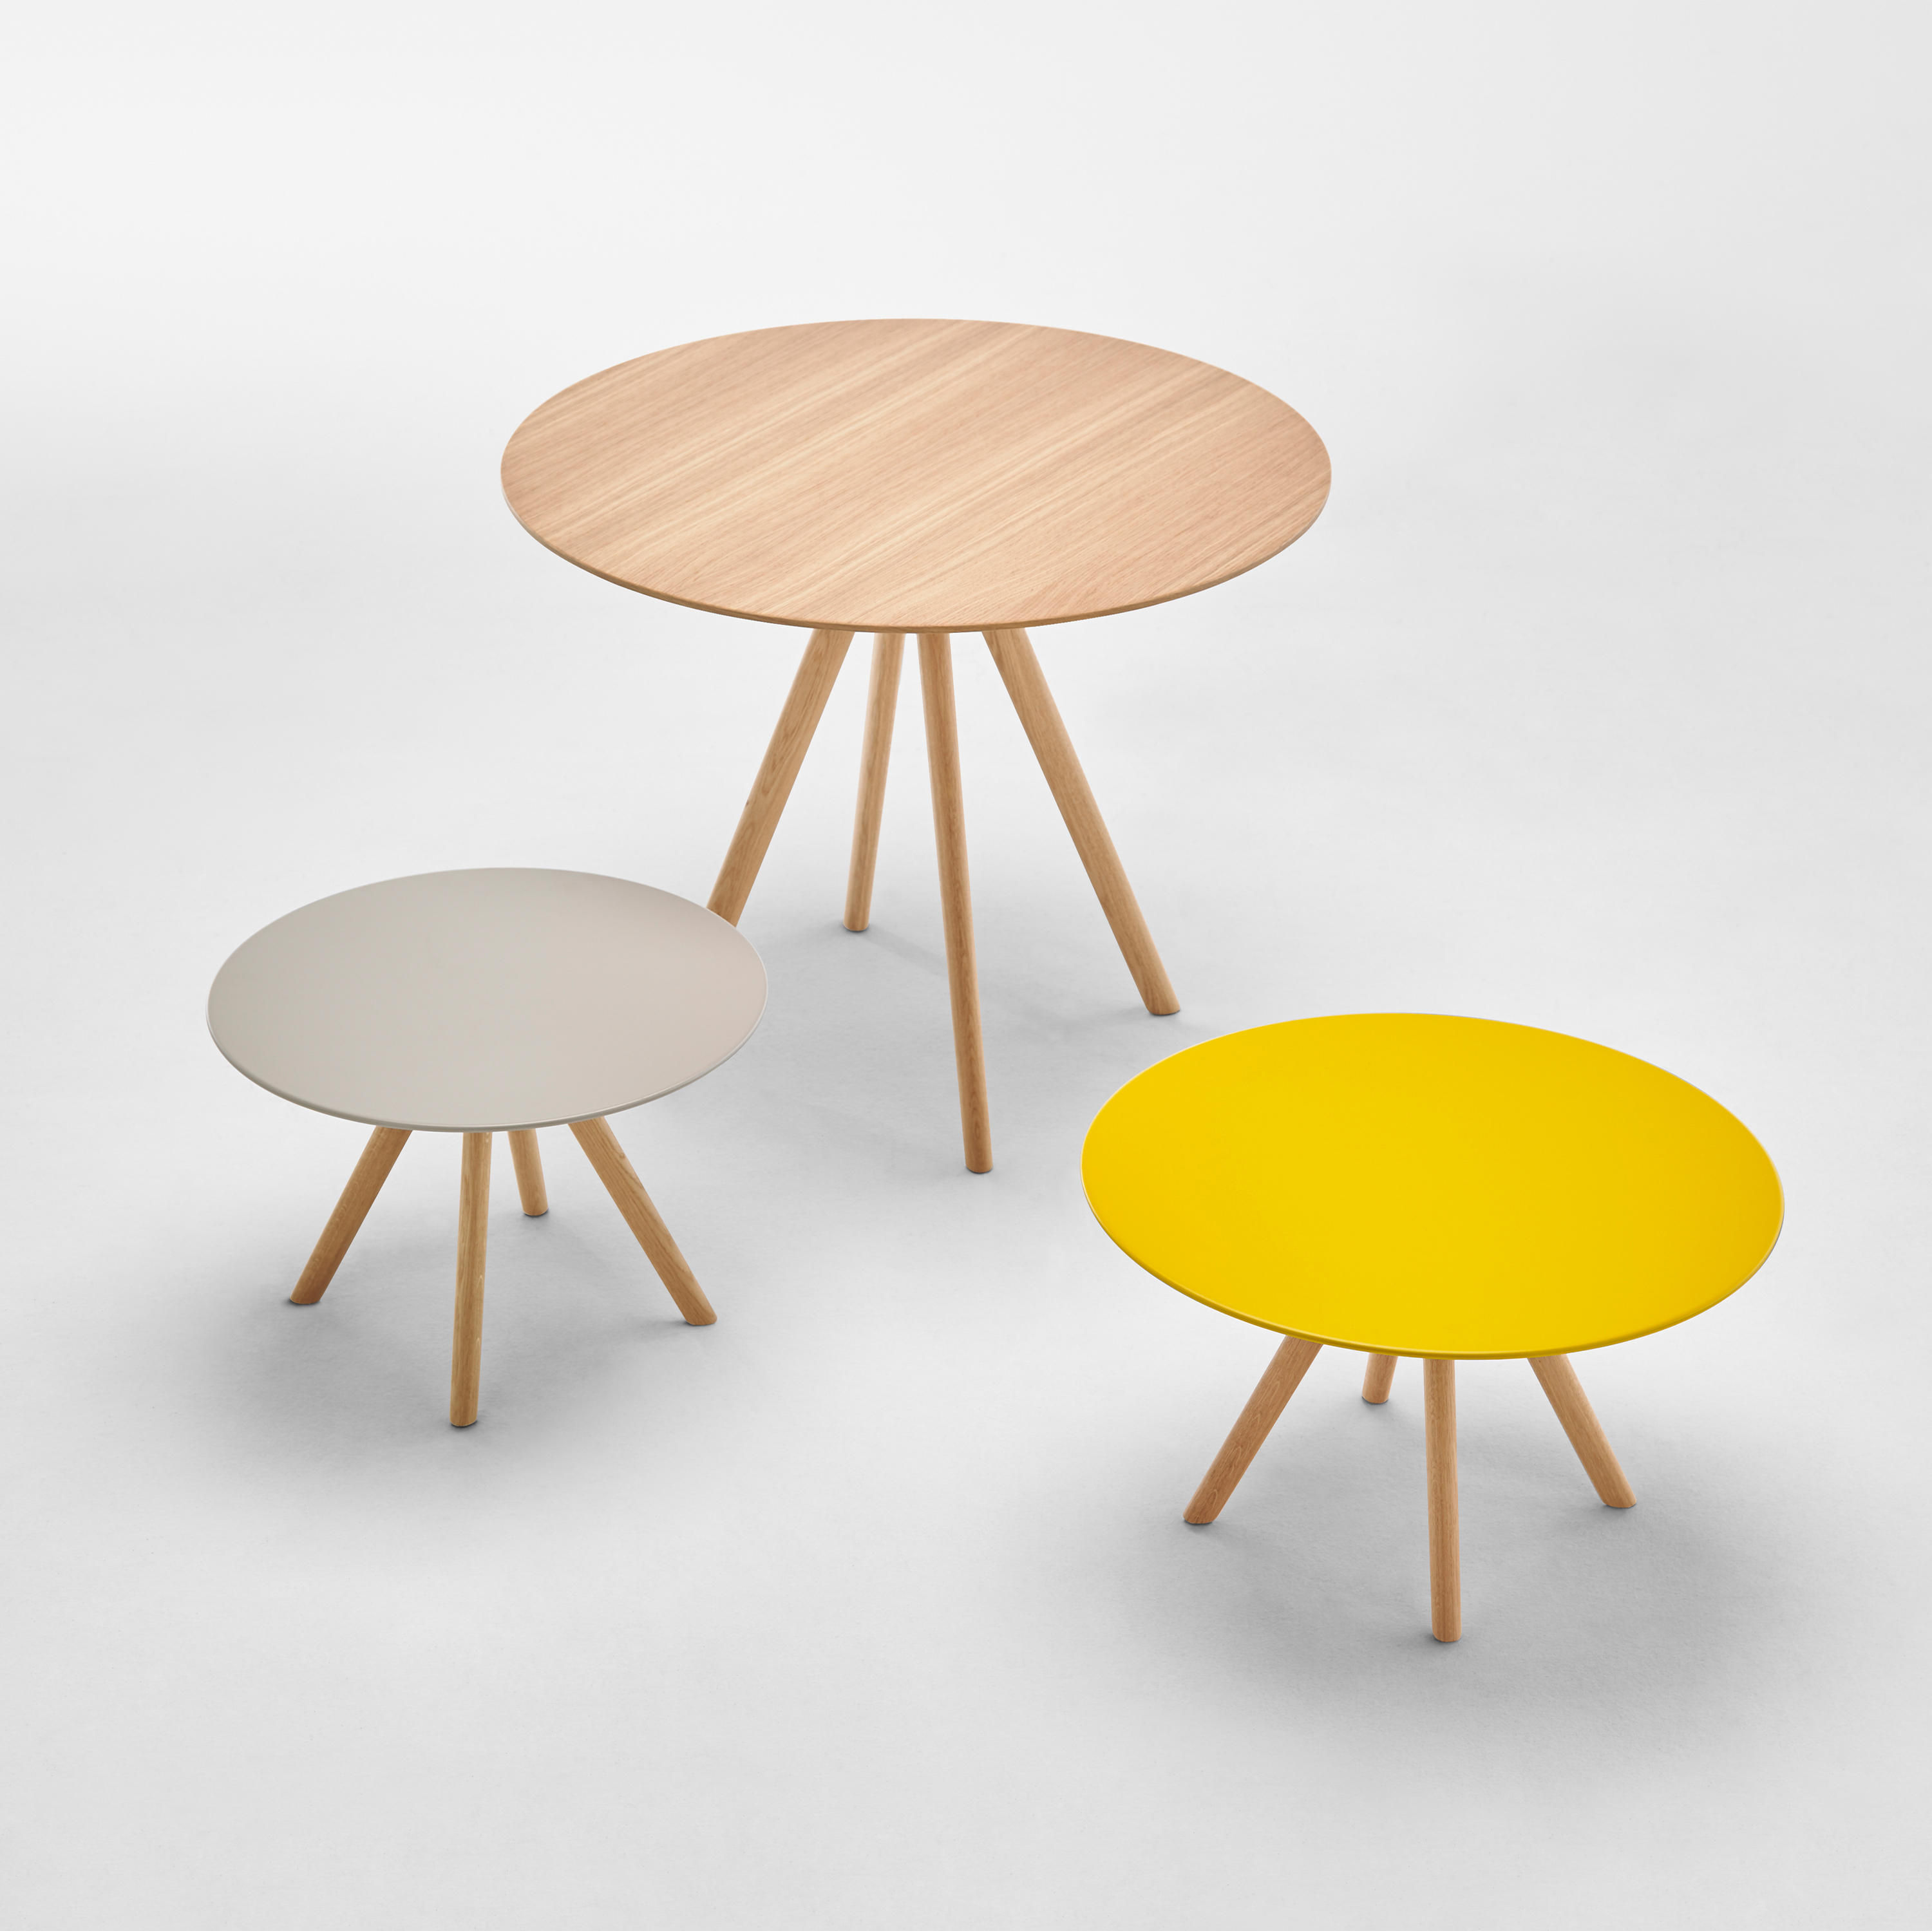 Stiks Tables by Christophe Pillet for Inclass